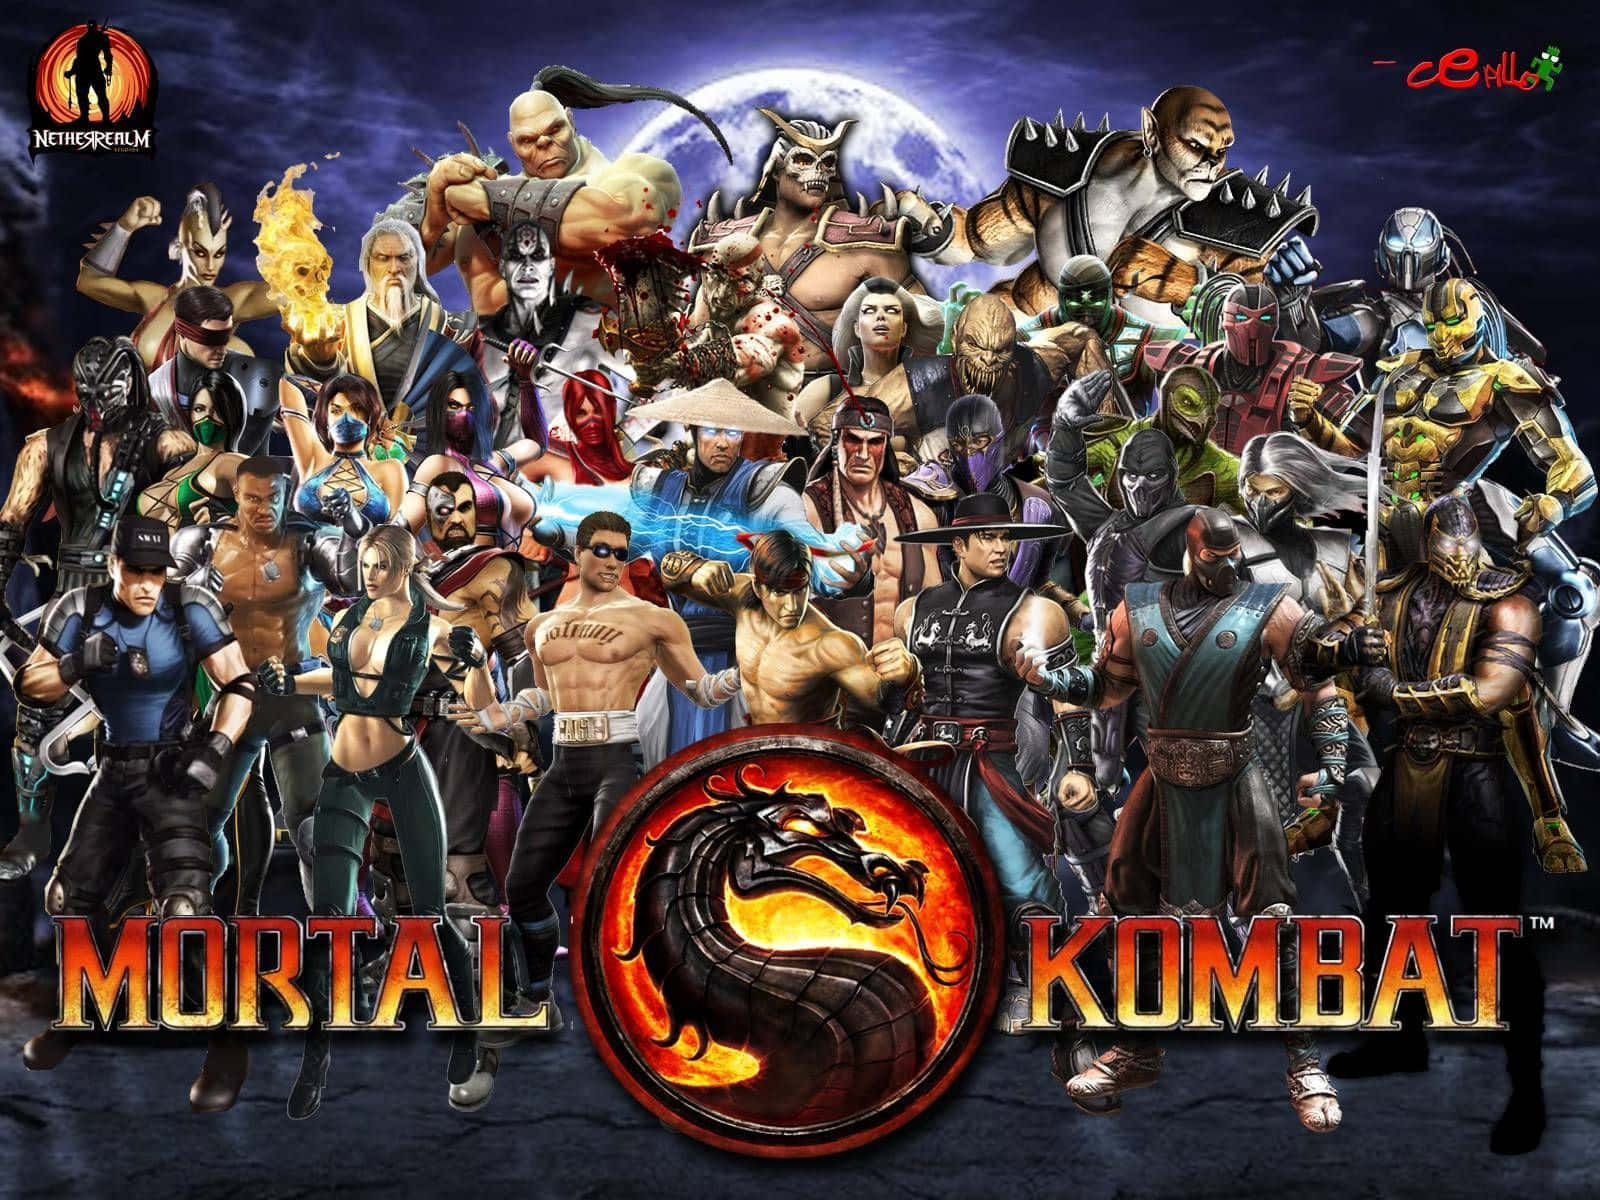 Witness the next chapter of the classic fighting series with Mortal Kombat